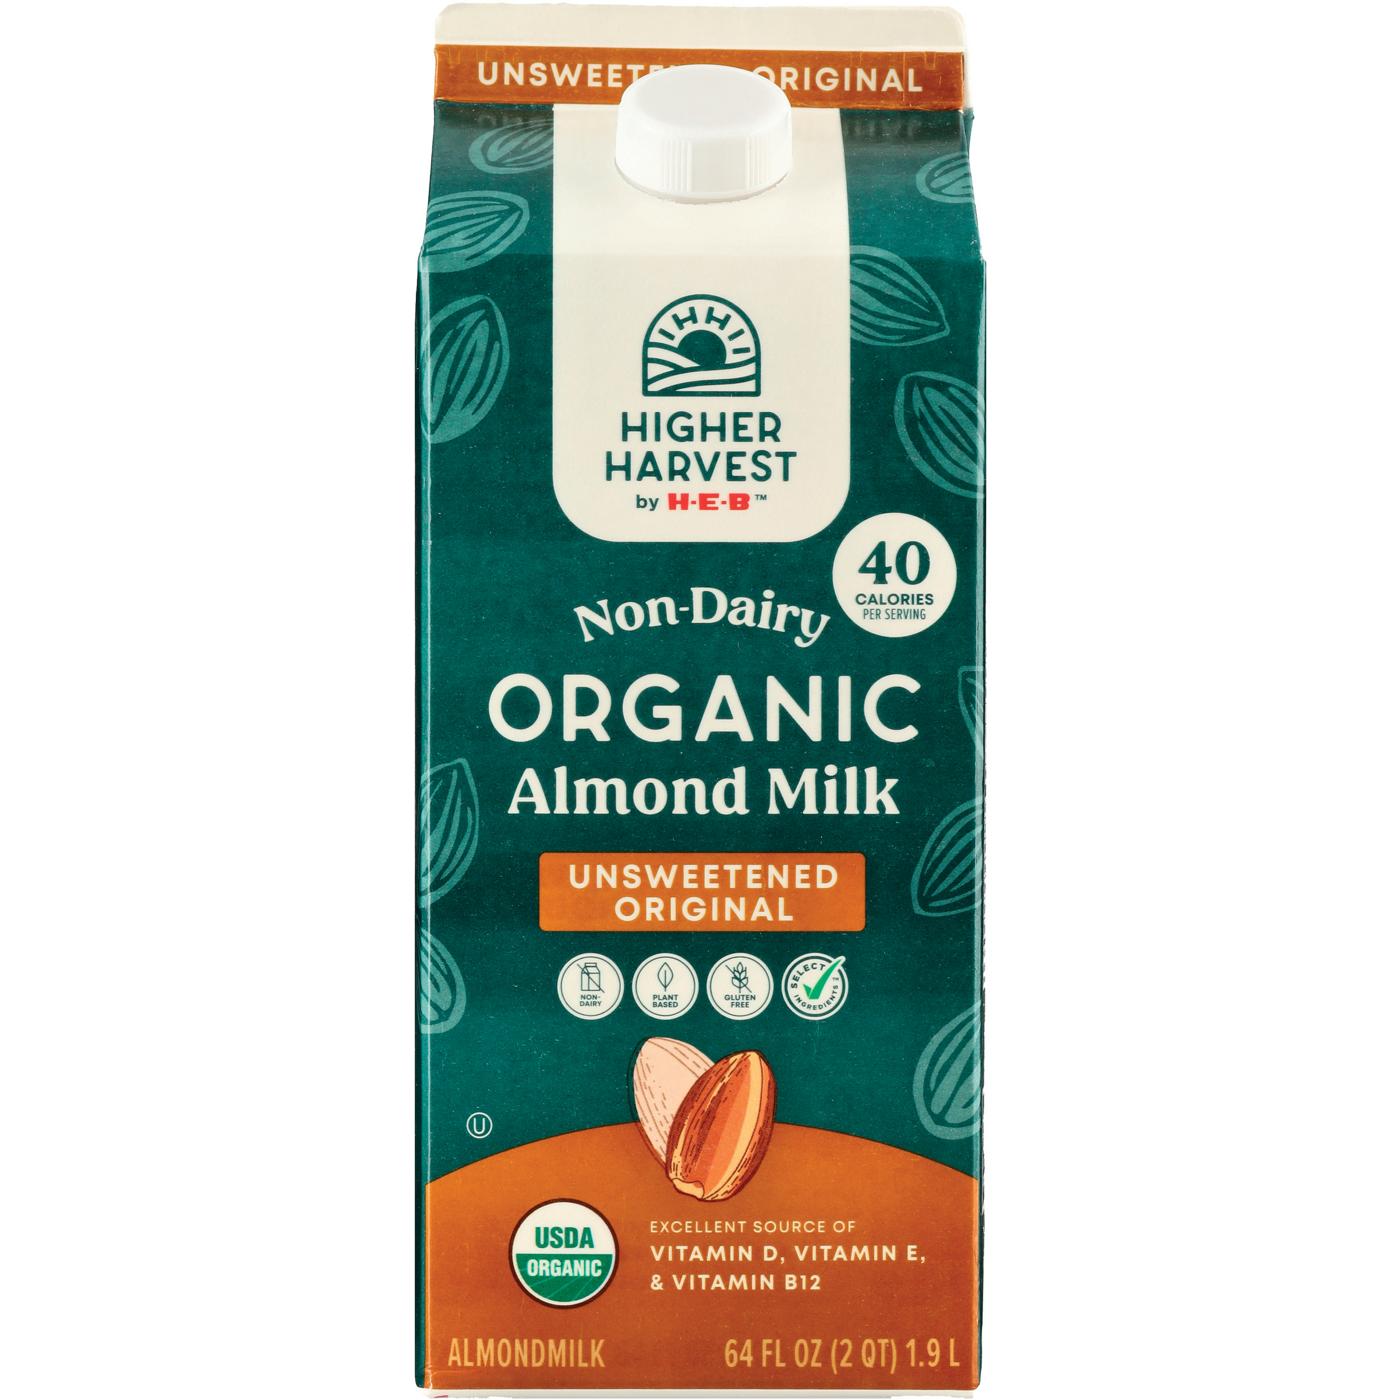 Higher Harvest by H-E-B Organic Non-Dairy Almond Milk – Unsweetened Original; image 1 of 2